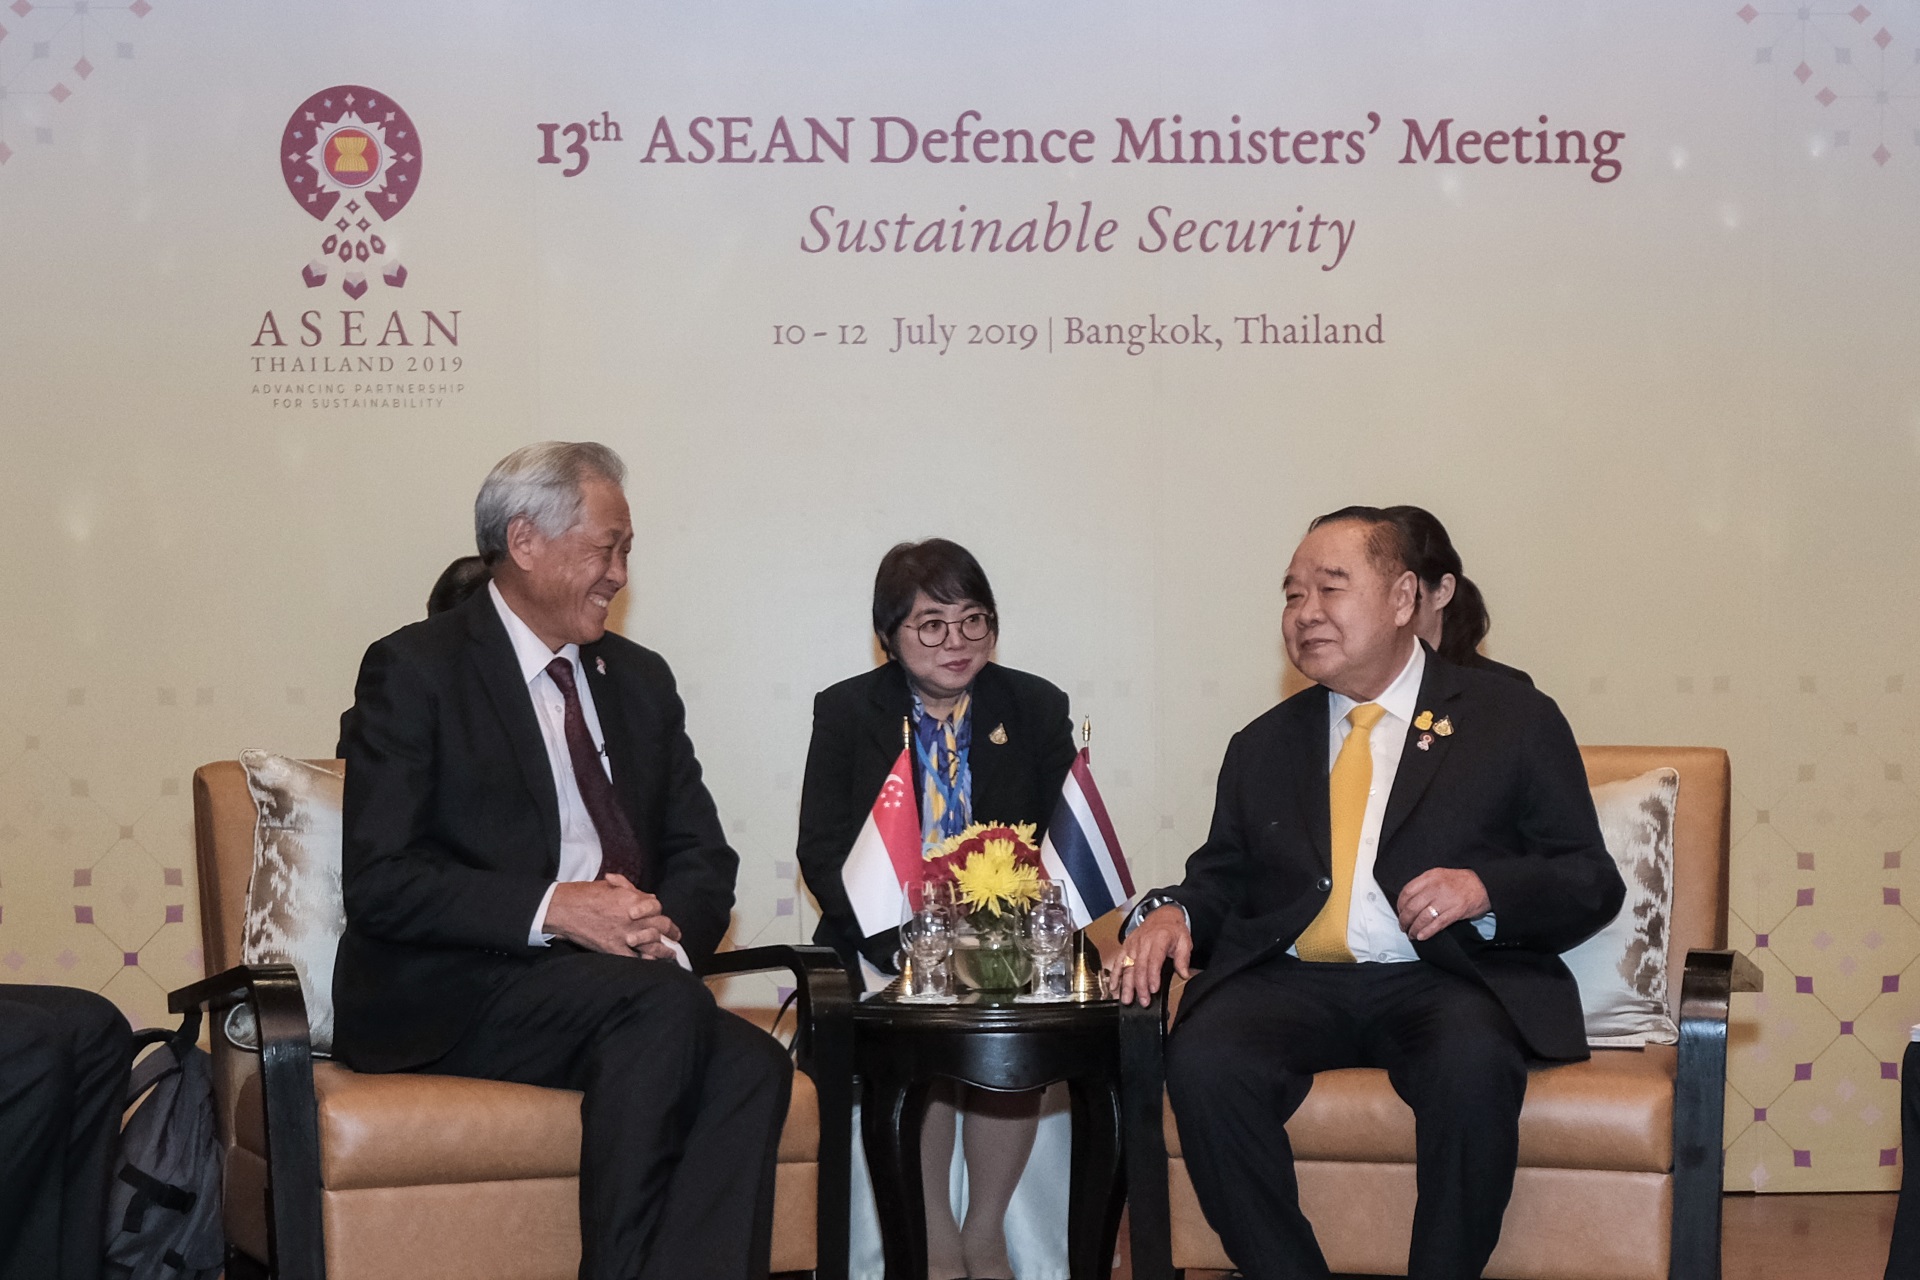 Dr Ng meeting with Thailand Deputy Prime Minister and Minister of Defence GEN Prawit Wongsuwan on the sidelines of the 13th ADMM.